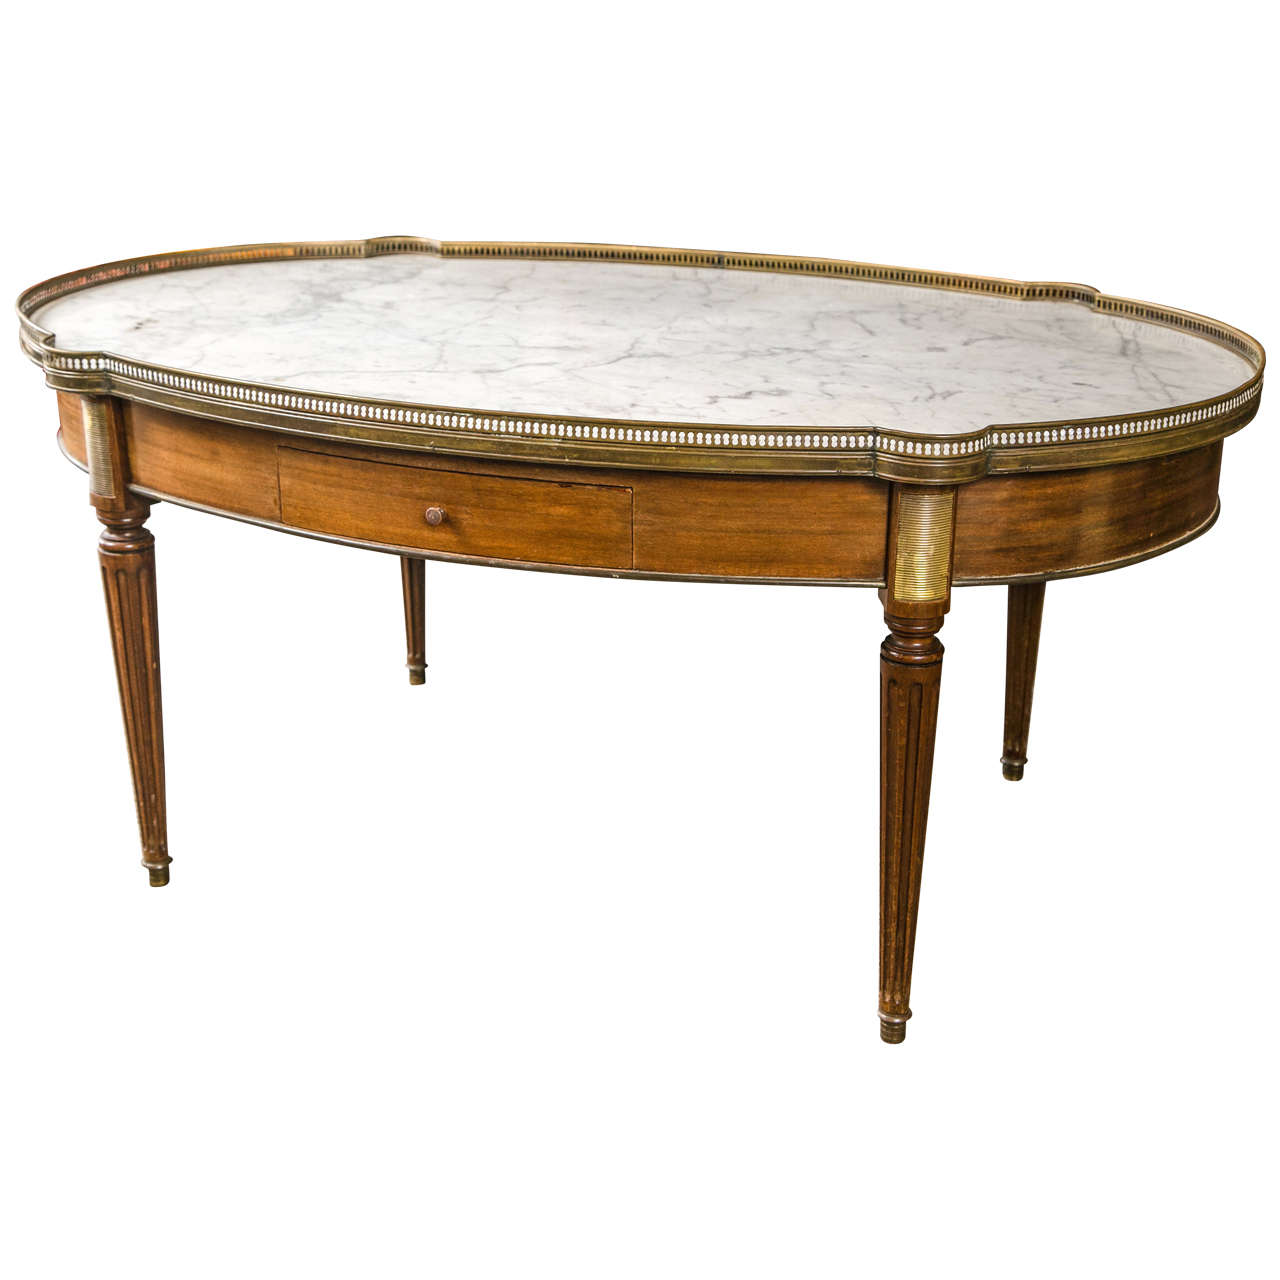 Louis XVI Style Marble-Top Low Table or Coffee Table by Maison Jansen